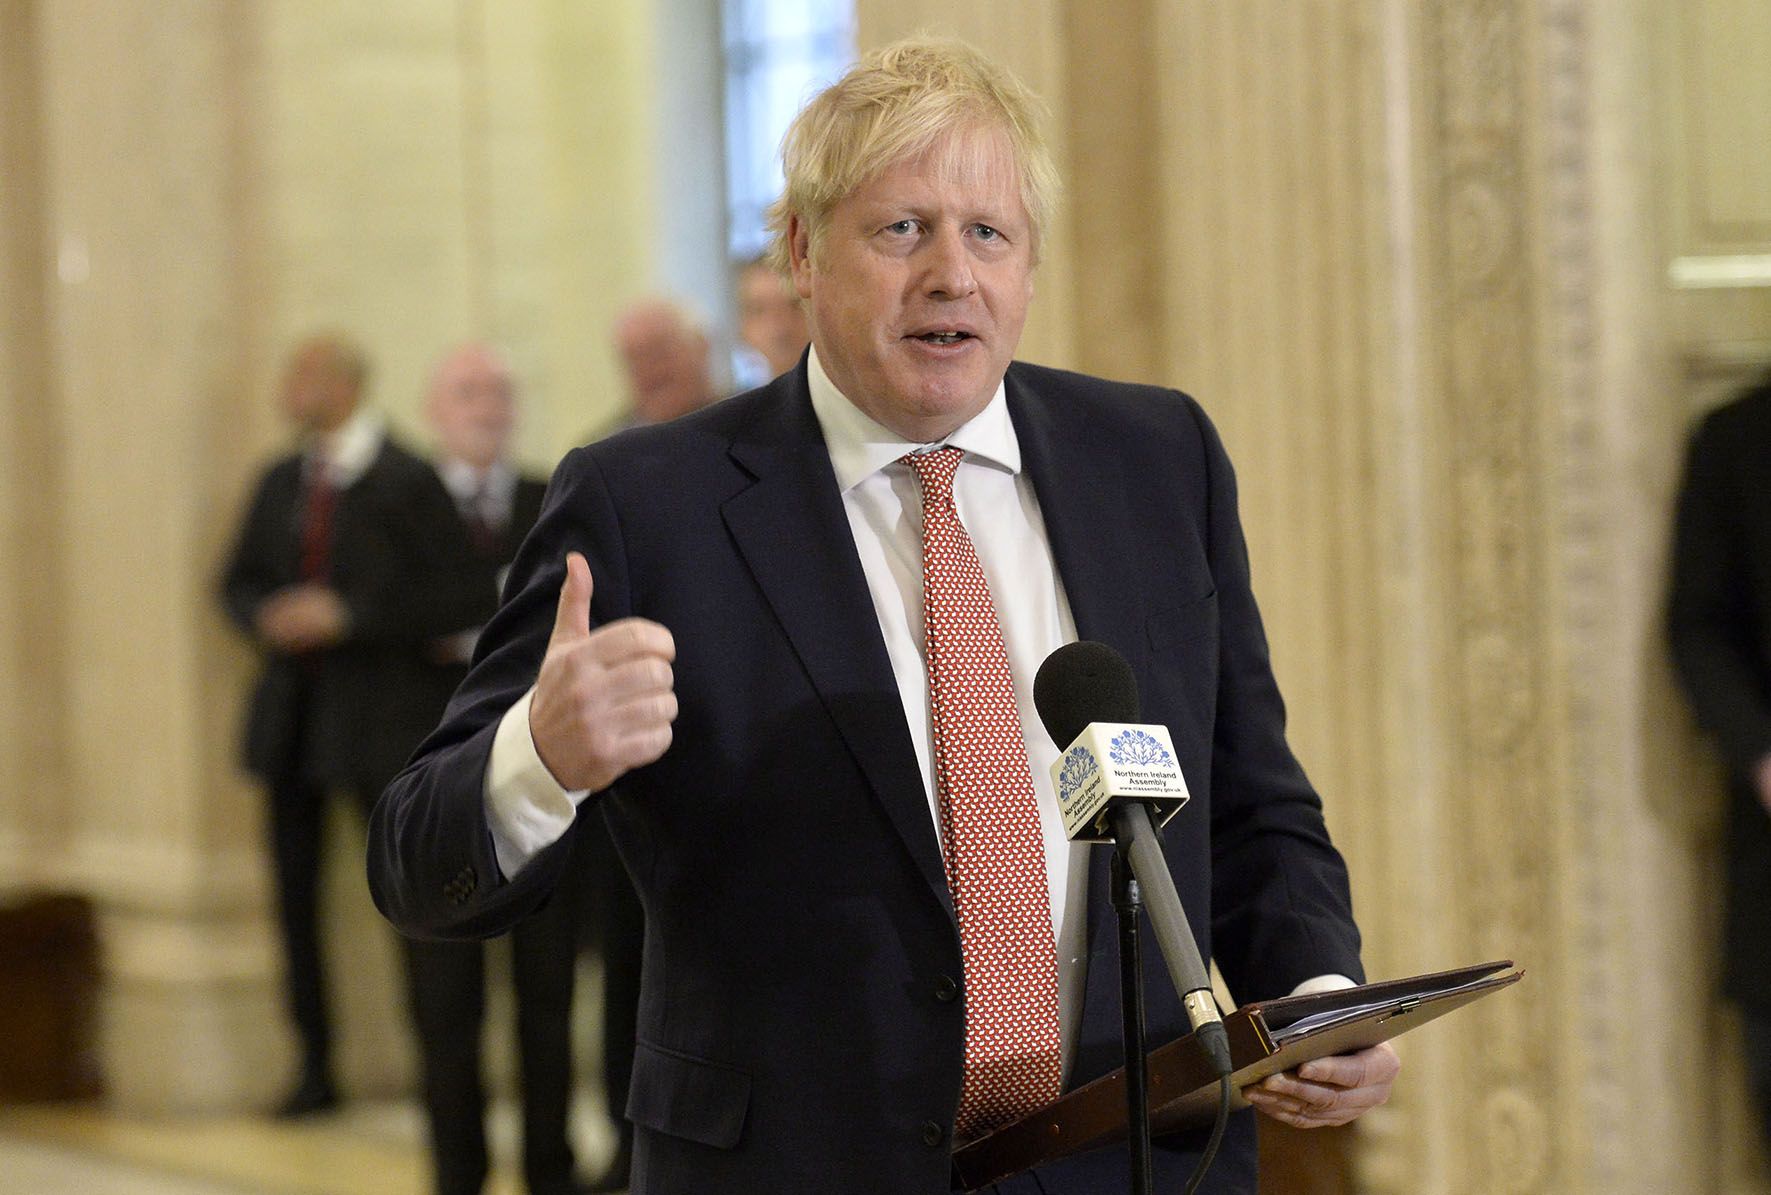 ‘SUCCESS’: British Prime Minister Boris Johnson gives thumbs-up to \"100 years of calamity\"